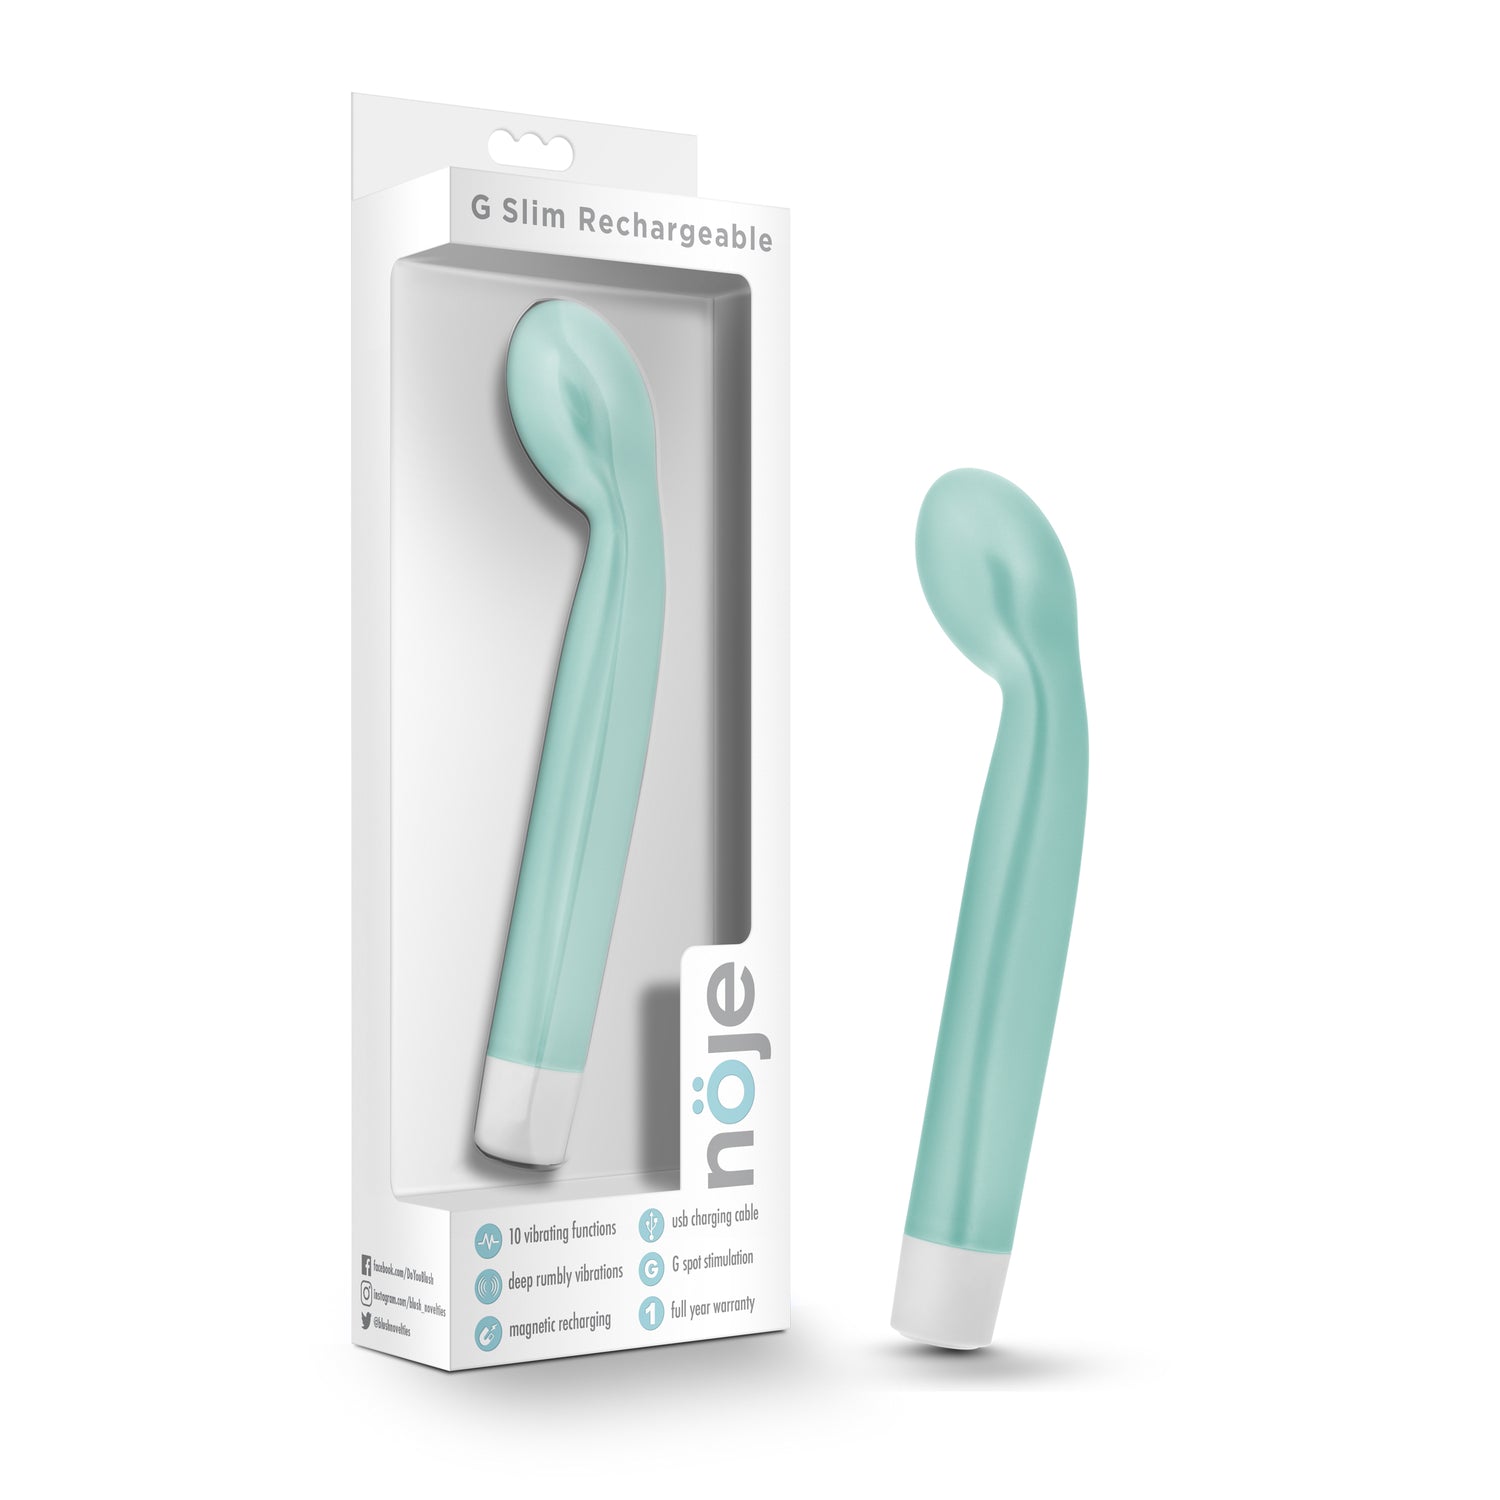 Noje G Slim Rechargeable Sage - Just for you desires